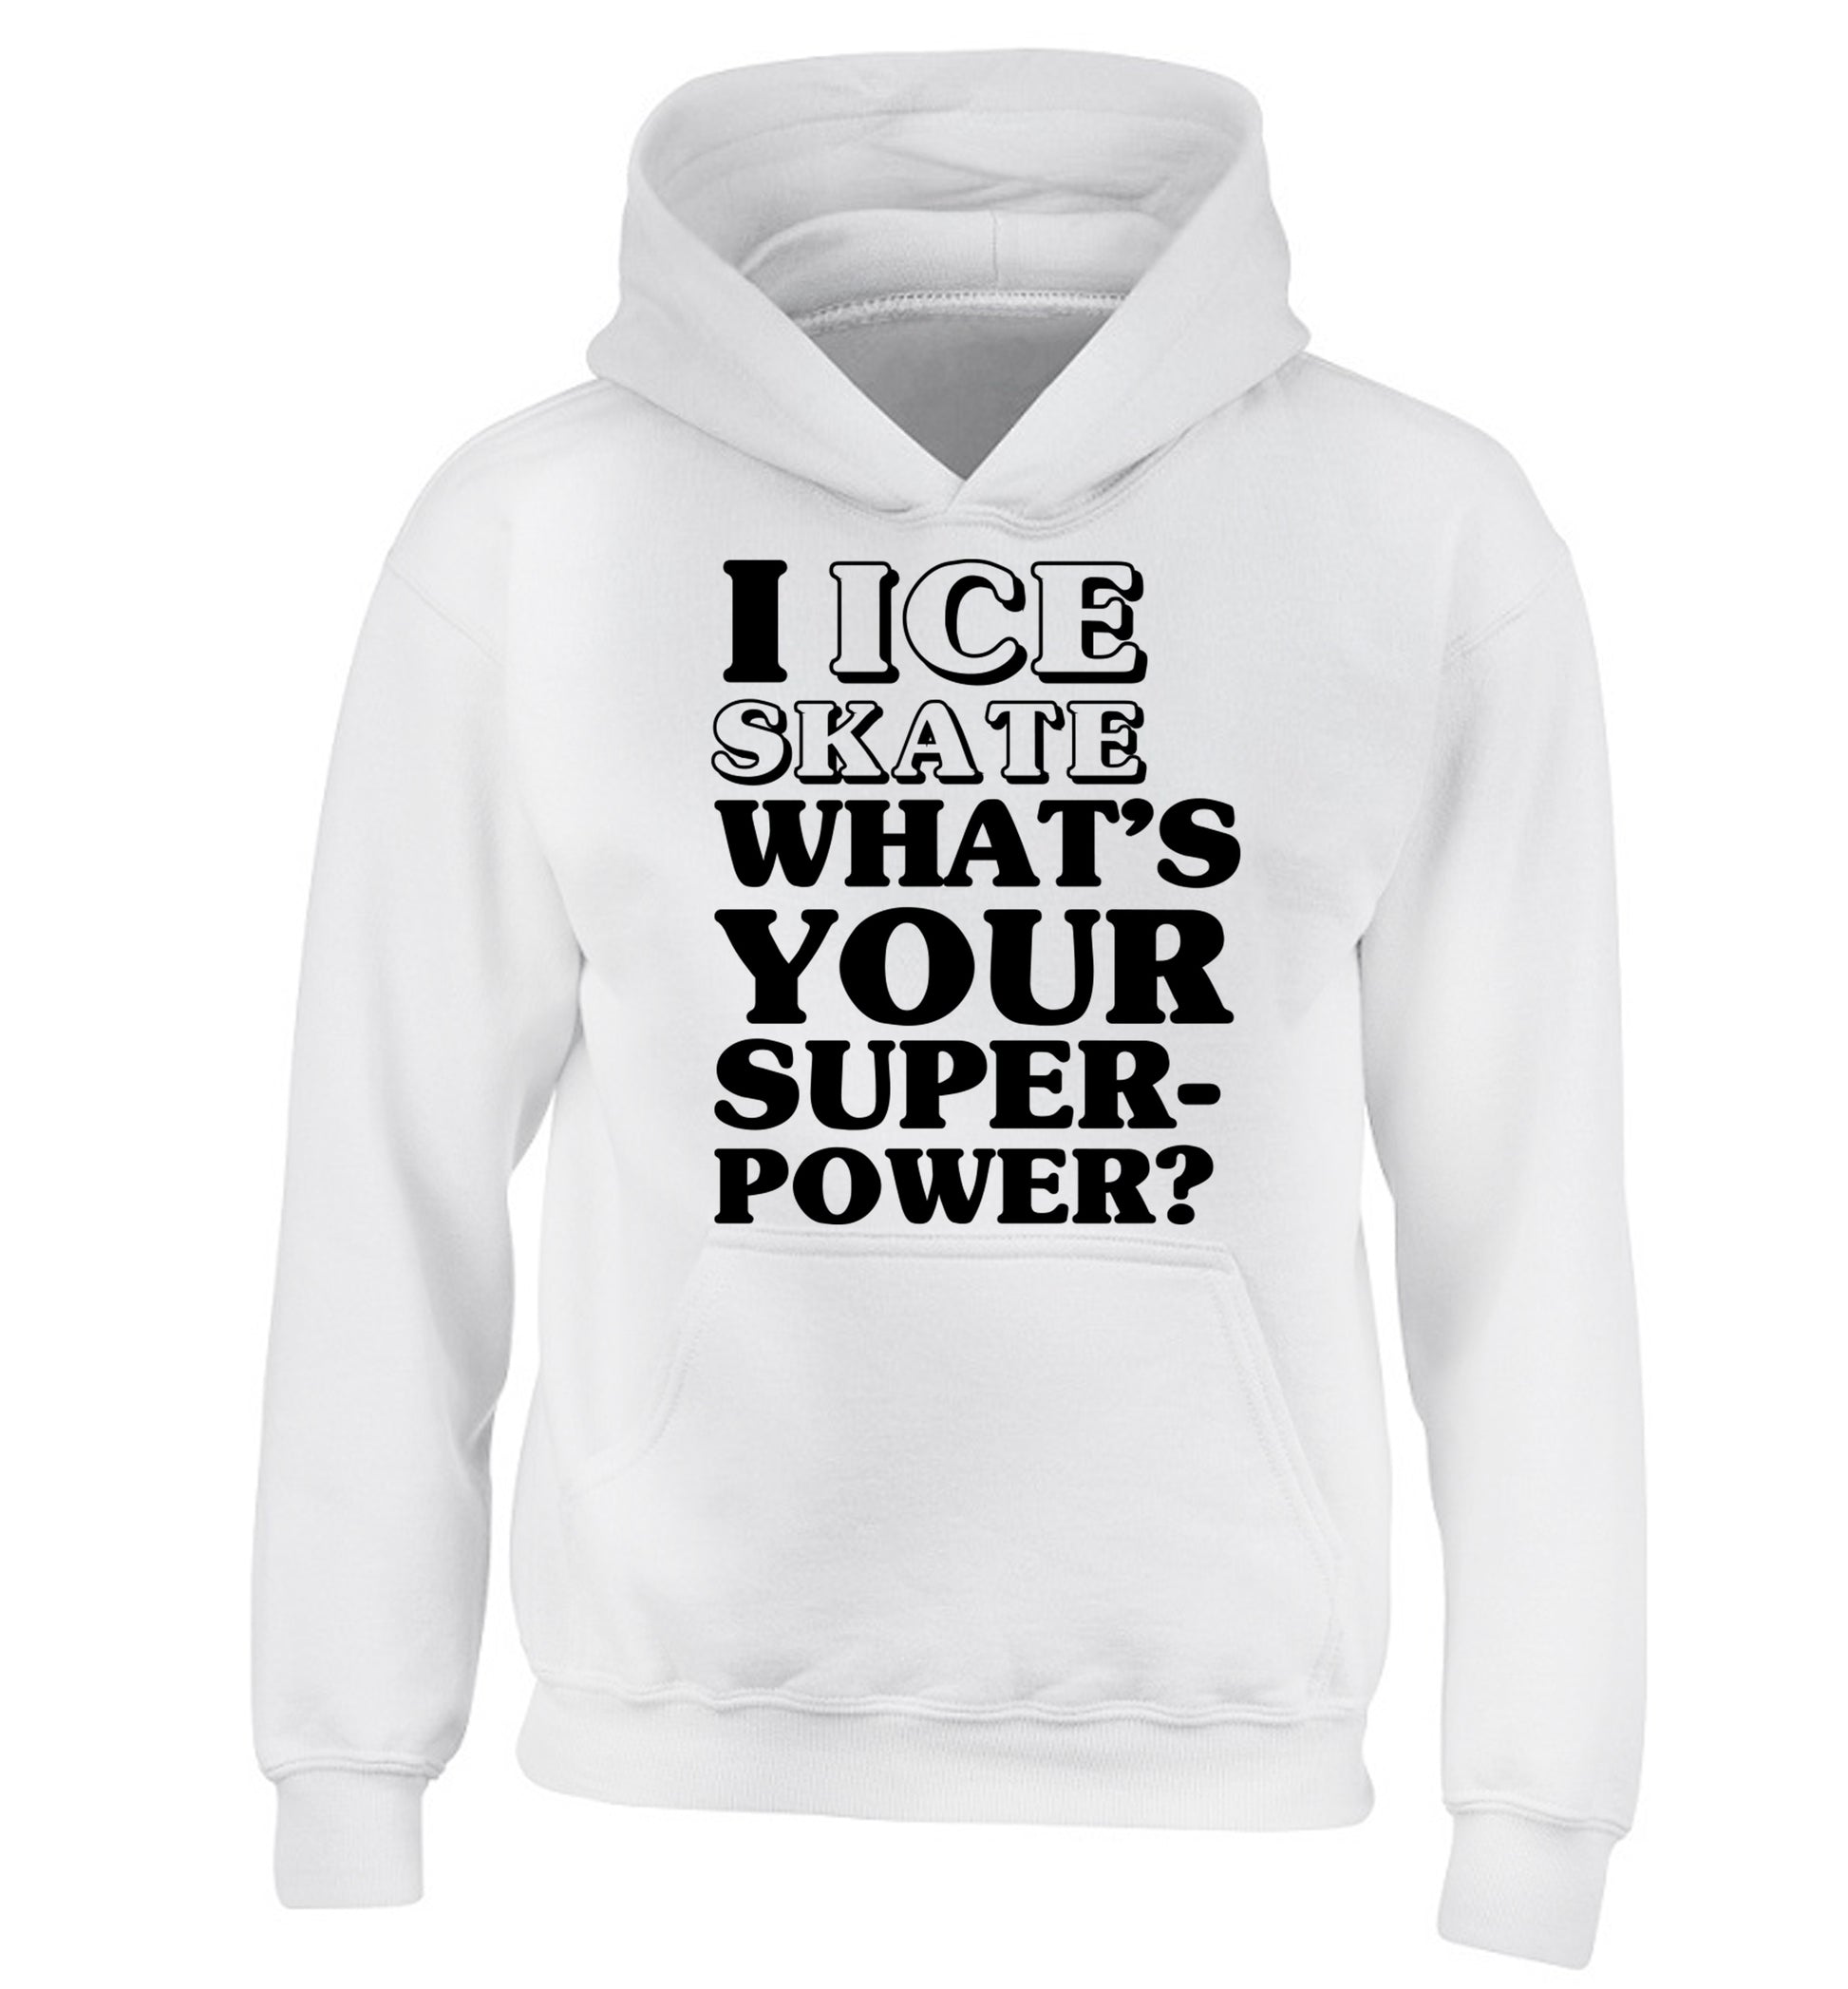 I ice skate what's your superpower? children's white hoodie 12-14 Years